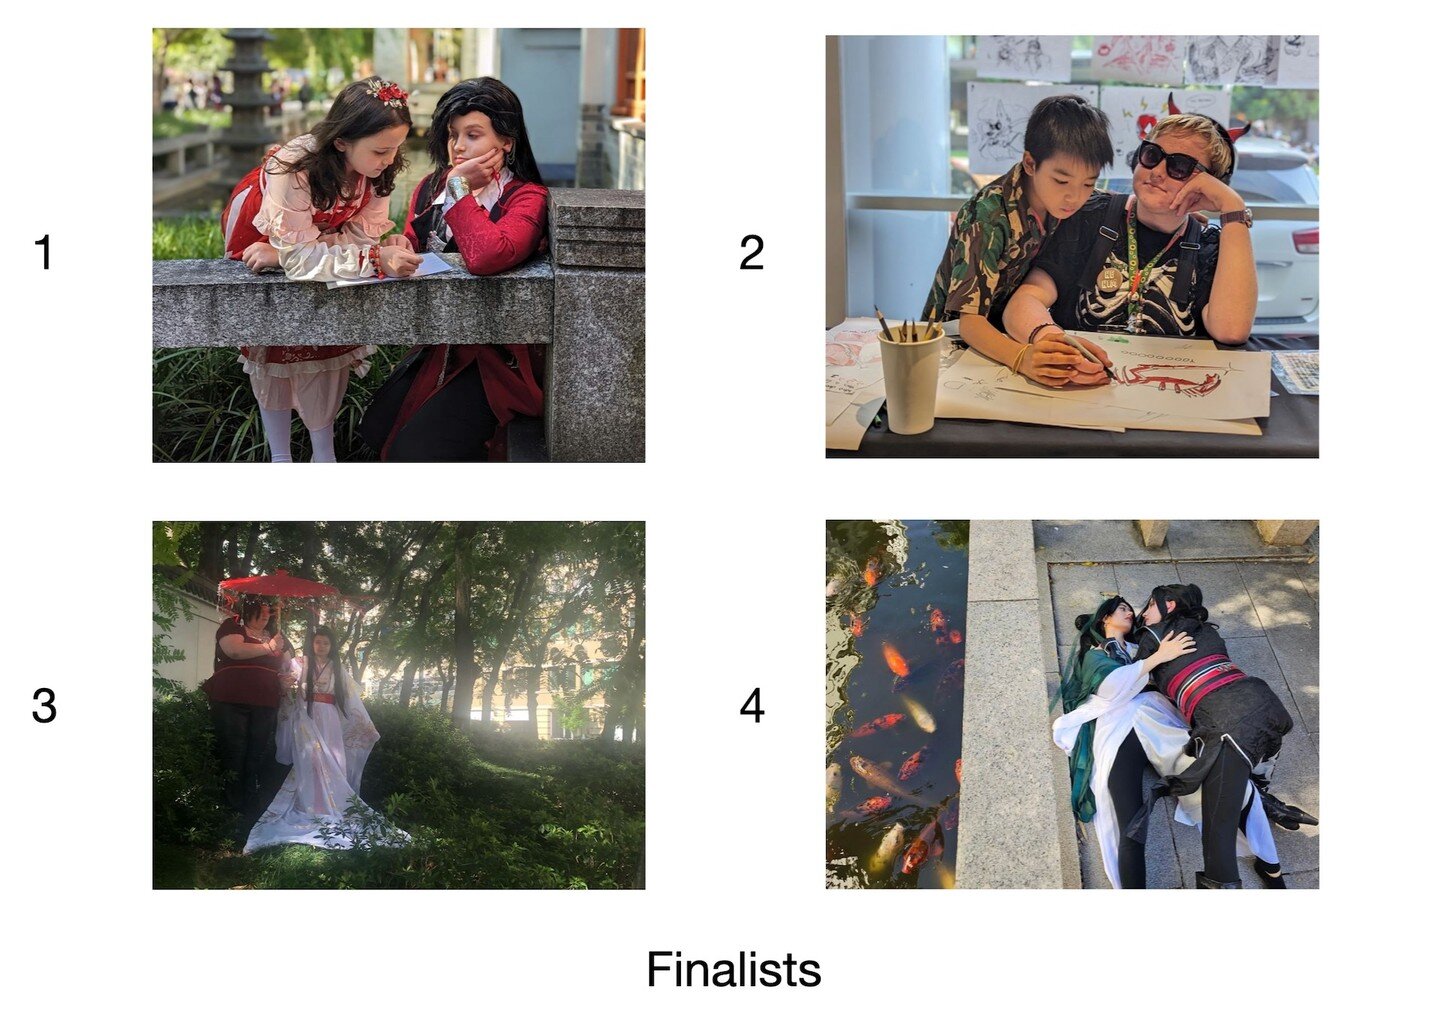 Photoshoot In The Garden

Finalists

@scum.cake&rsquo;s daughter &amp; @Hua.lian06 VS @milo_jan14 &amp; Wu Ming VS @Heathen.madness &amp; @mapleleaf_cos VS @misshualian &amp; @deceptively.darling.cosplay

Who will emerge as the victorious team?

#Dan